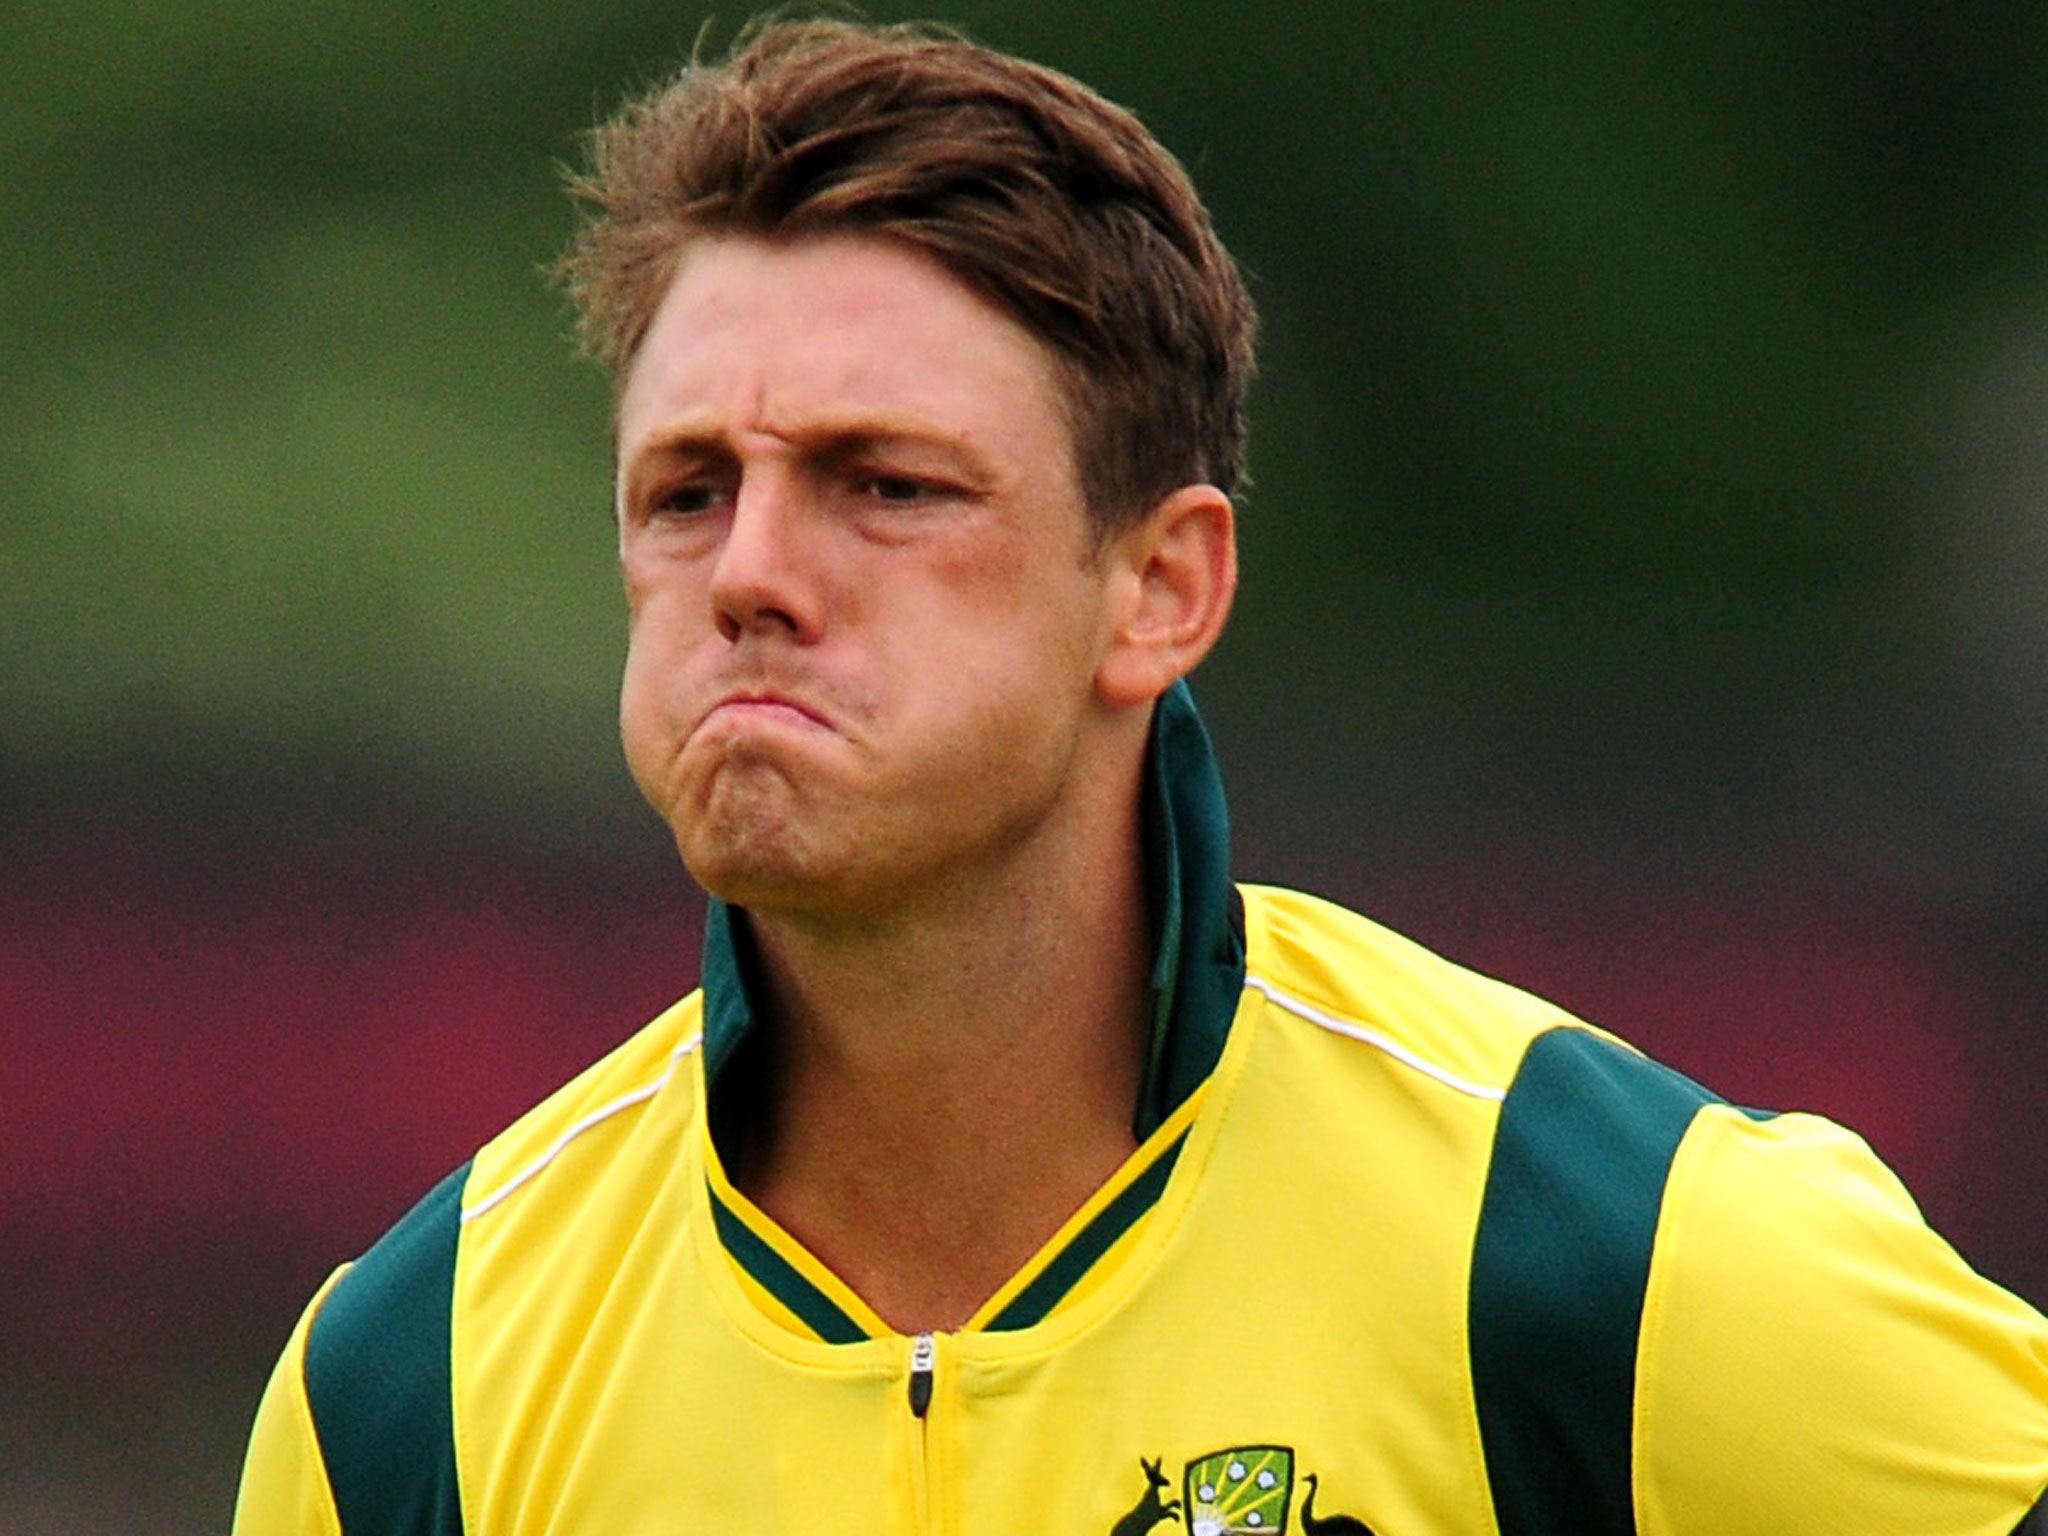 James Pattinson will have an operation on his lower abdomen to relieve a long-standing problem